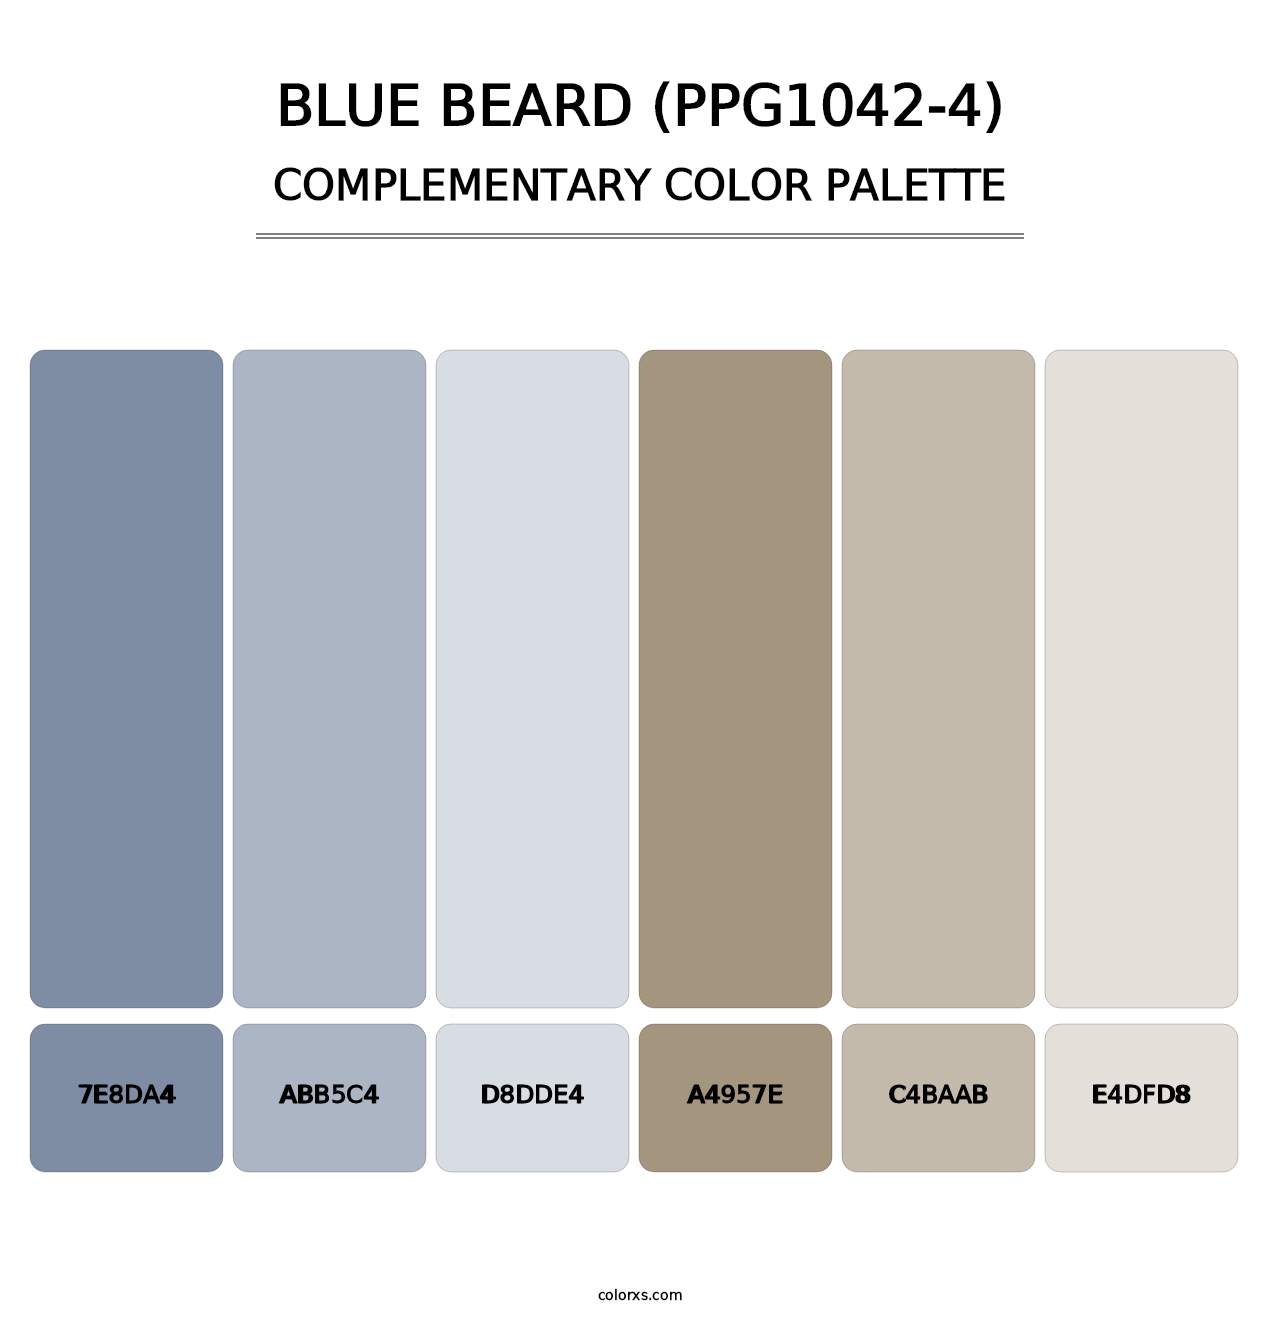 Blue Beard (PPG1042-4) - Complementary Color Palette